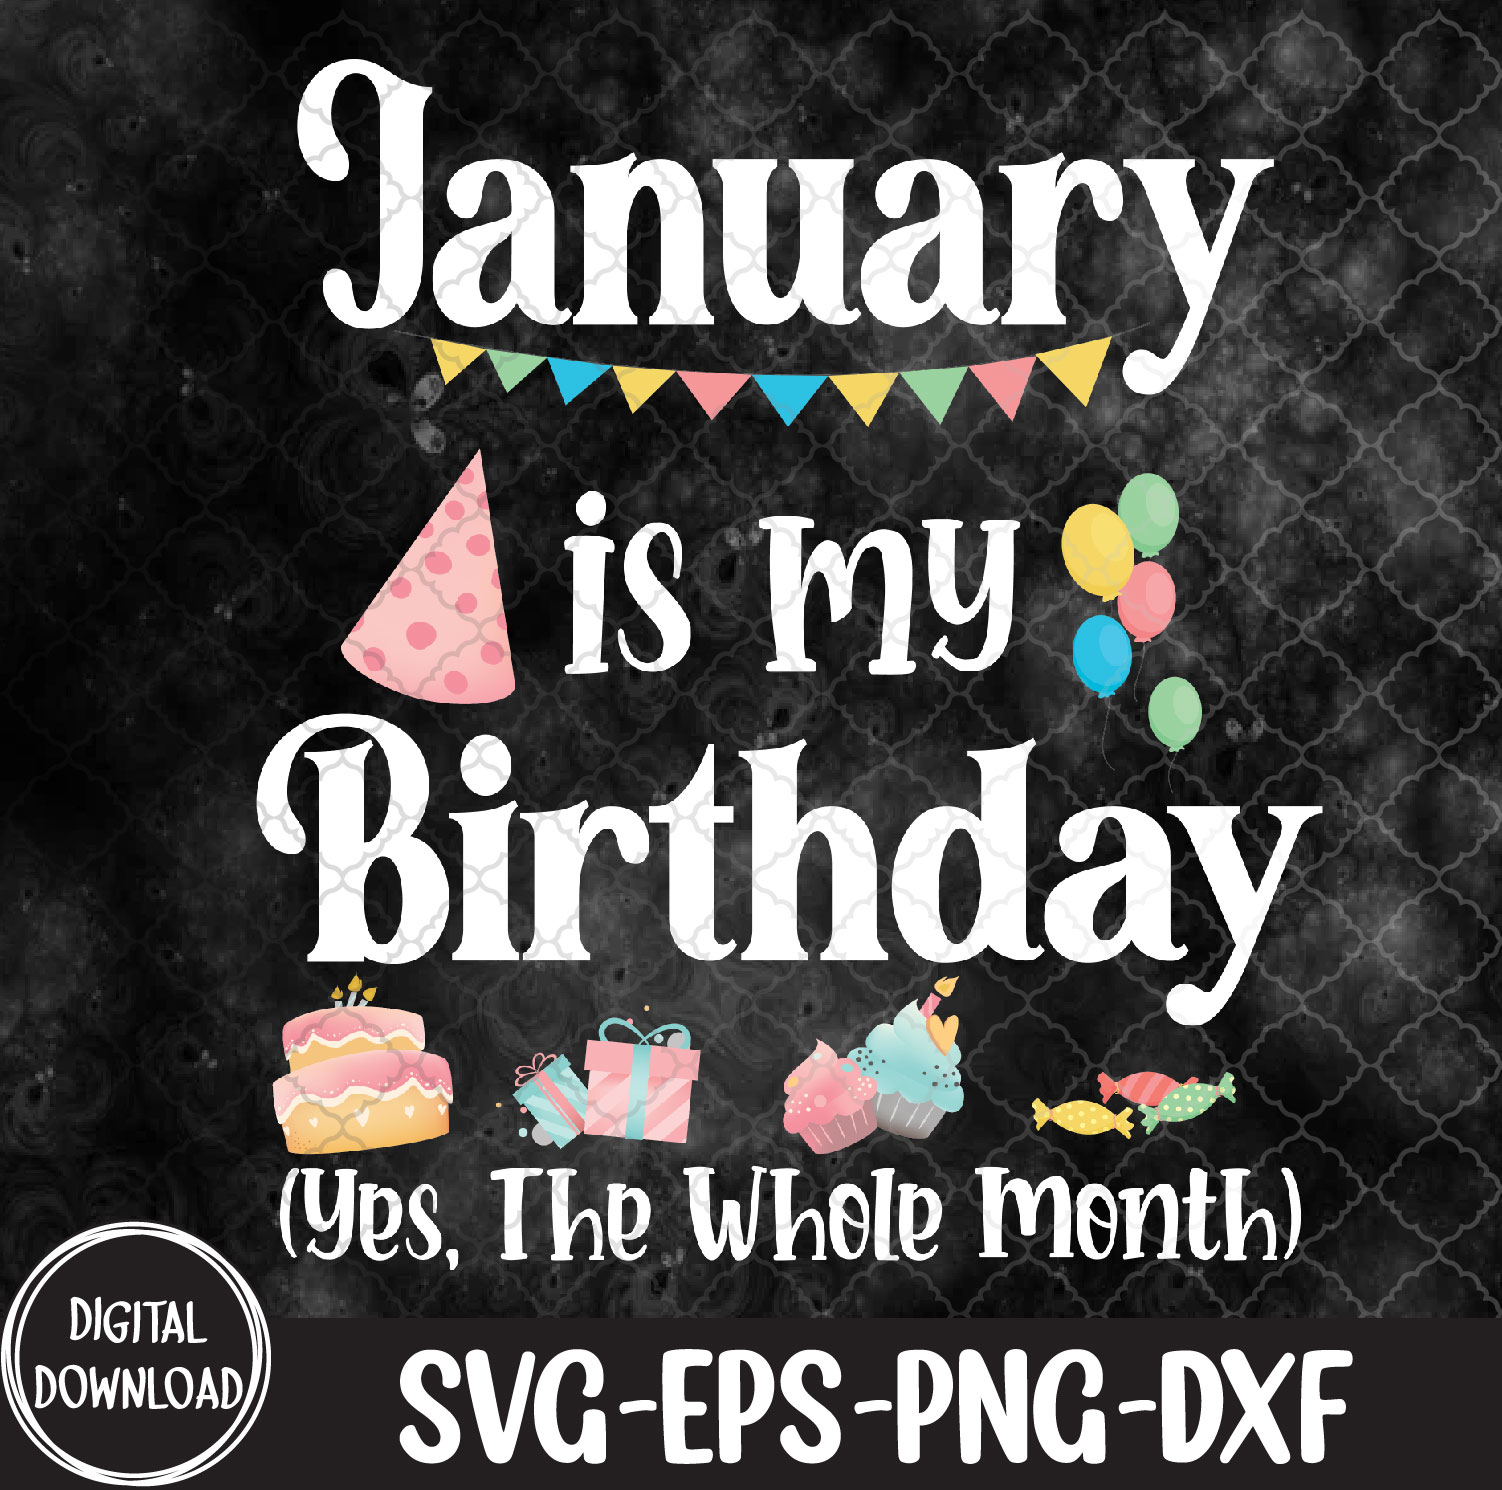 WTMNEW1512 09 29 January Is My Birthday Yes The Whole Month, My Birthday svg, Svg, Eps, Png, Dxf